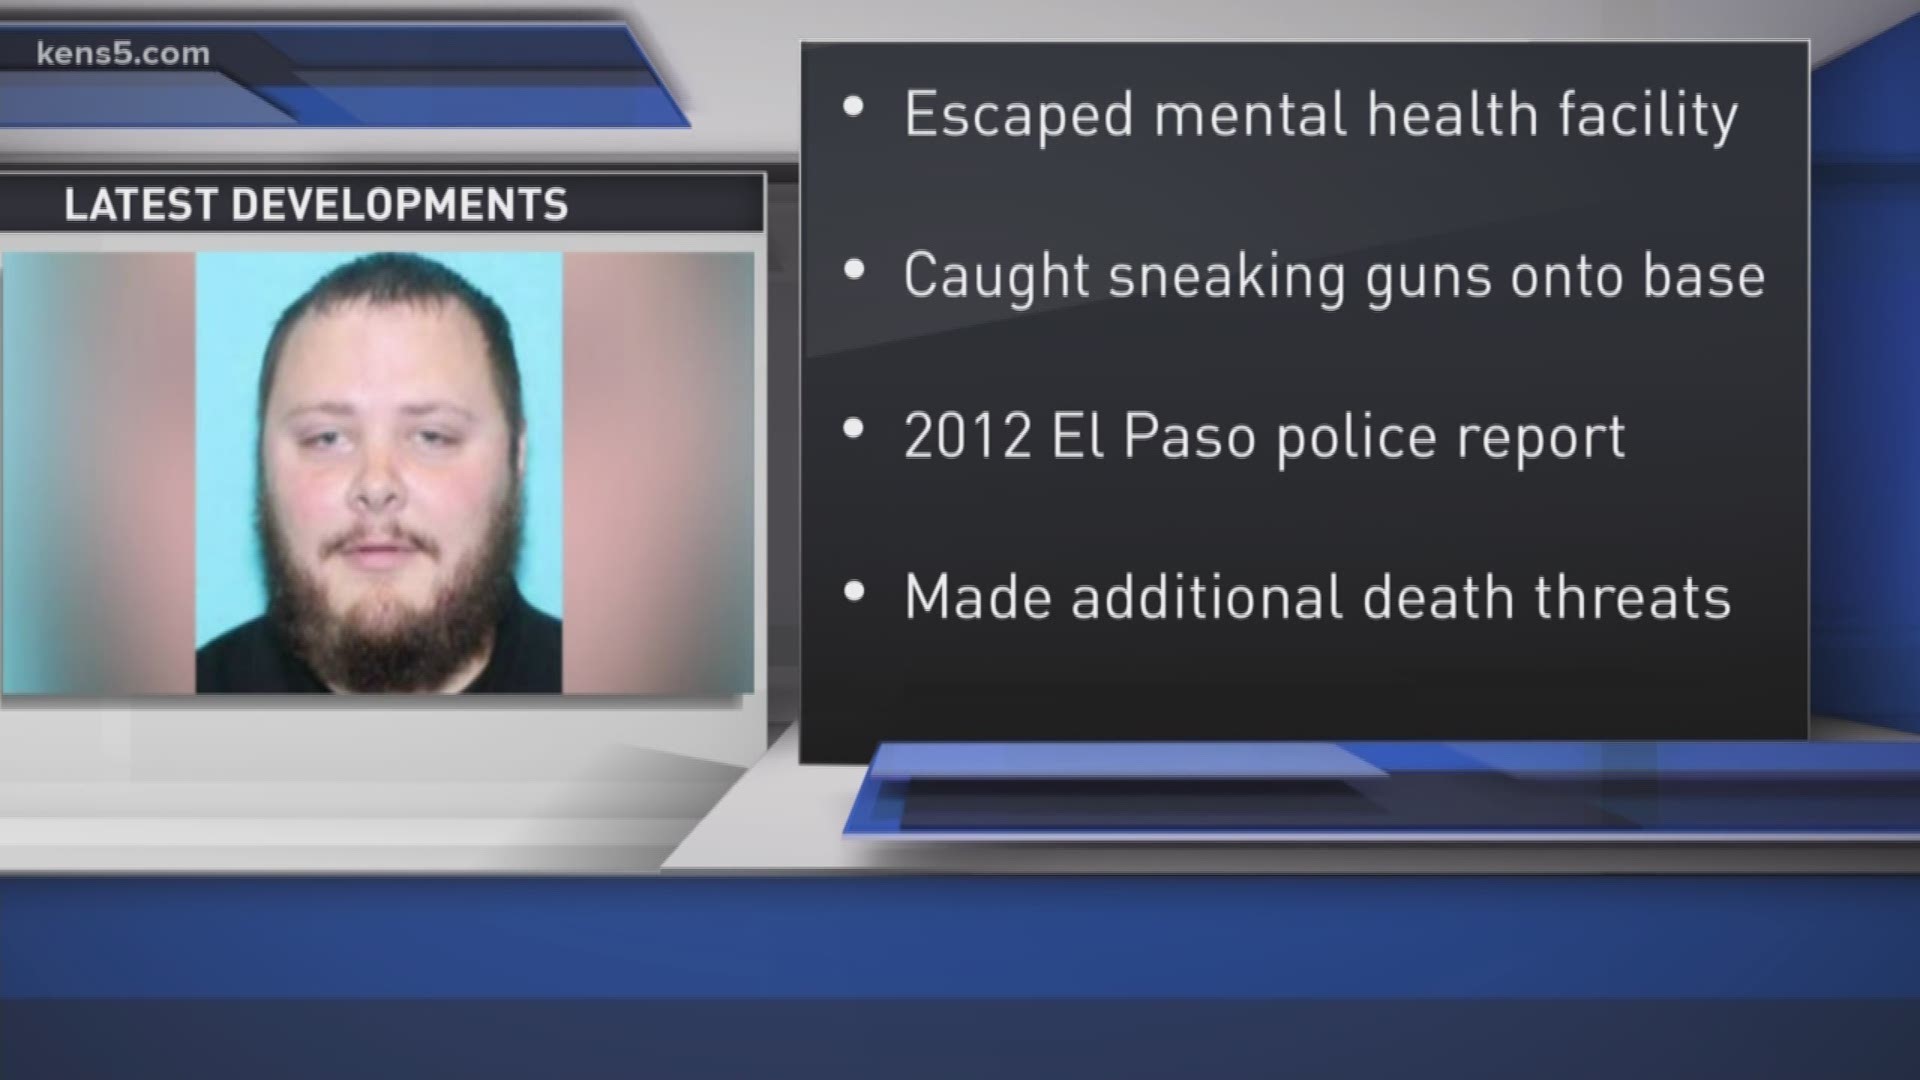 The suspect in the Sutherland Springs mass shooting reportedly escaped from a mental facility, was caught sneaking guns onto a base, and had made death threats in the past.